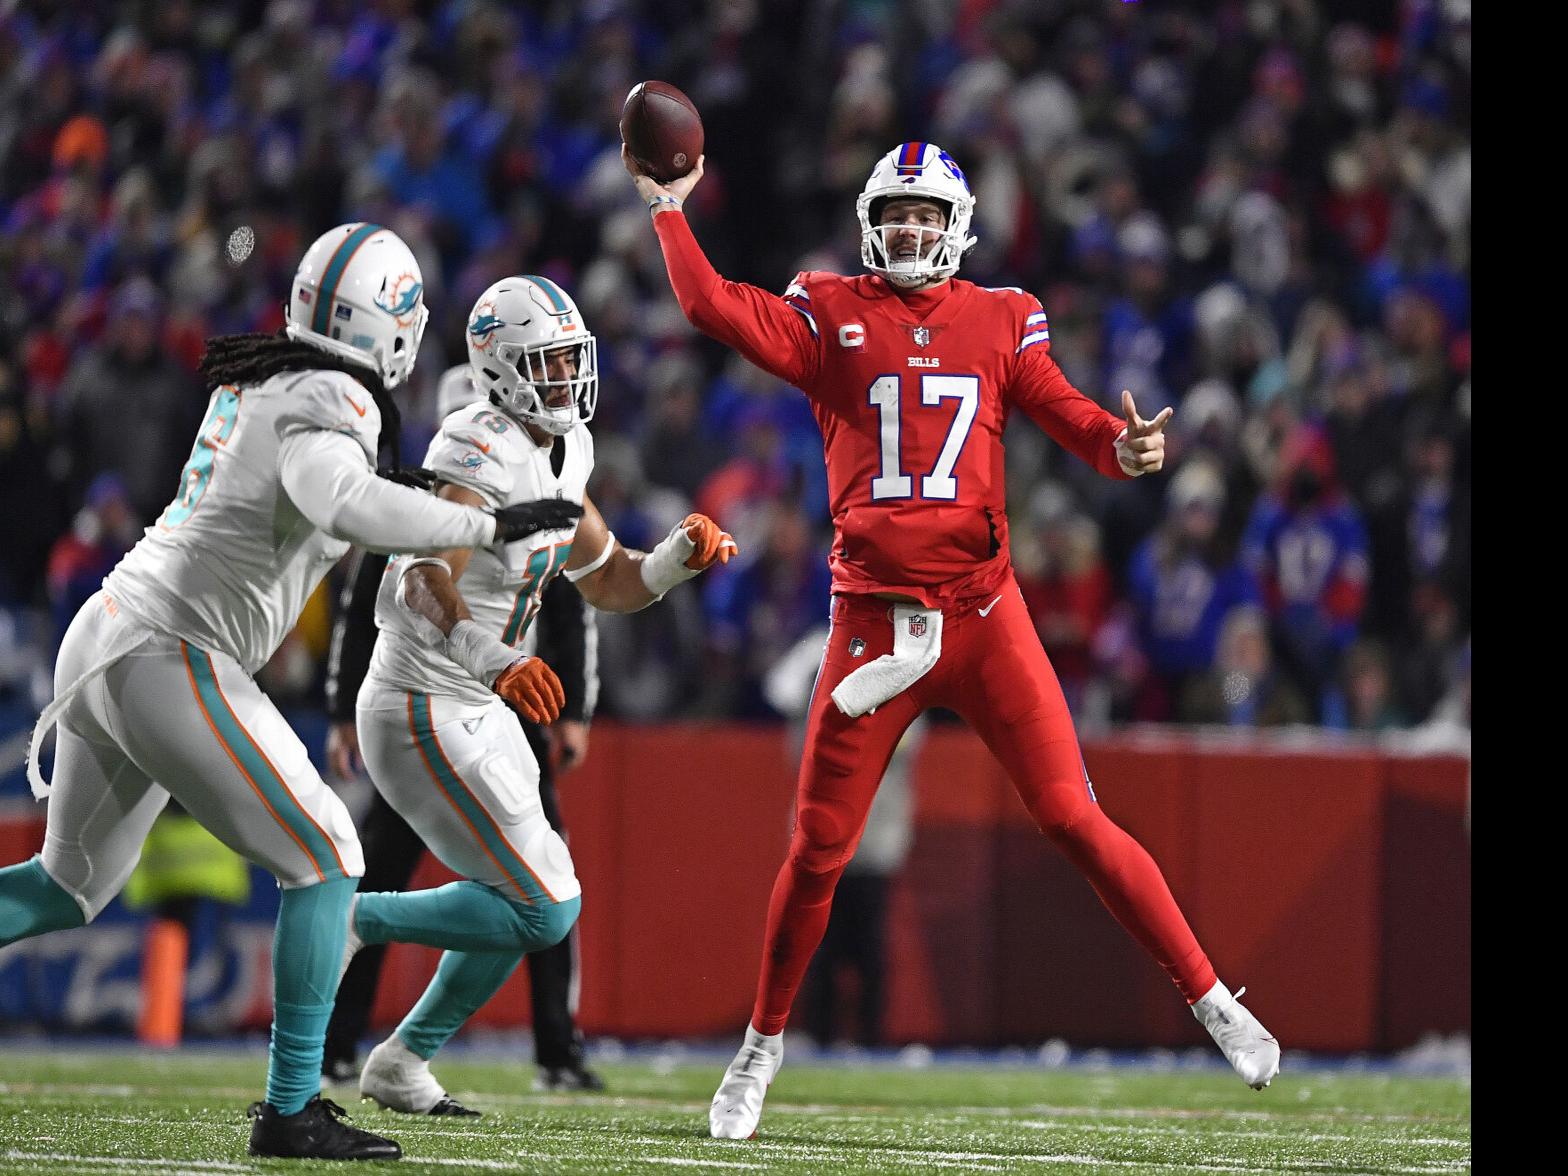 Bills rout division rival Dolphins 48-20